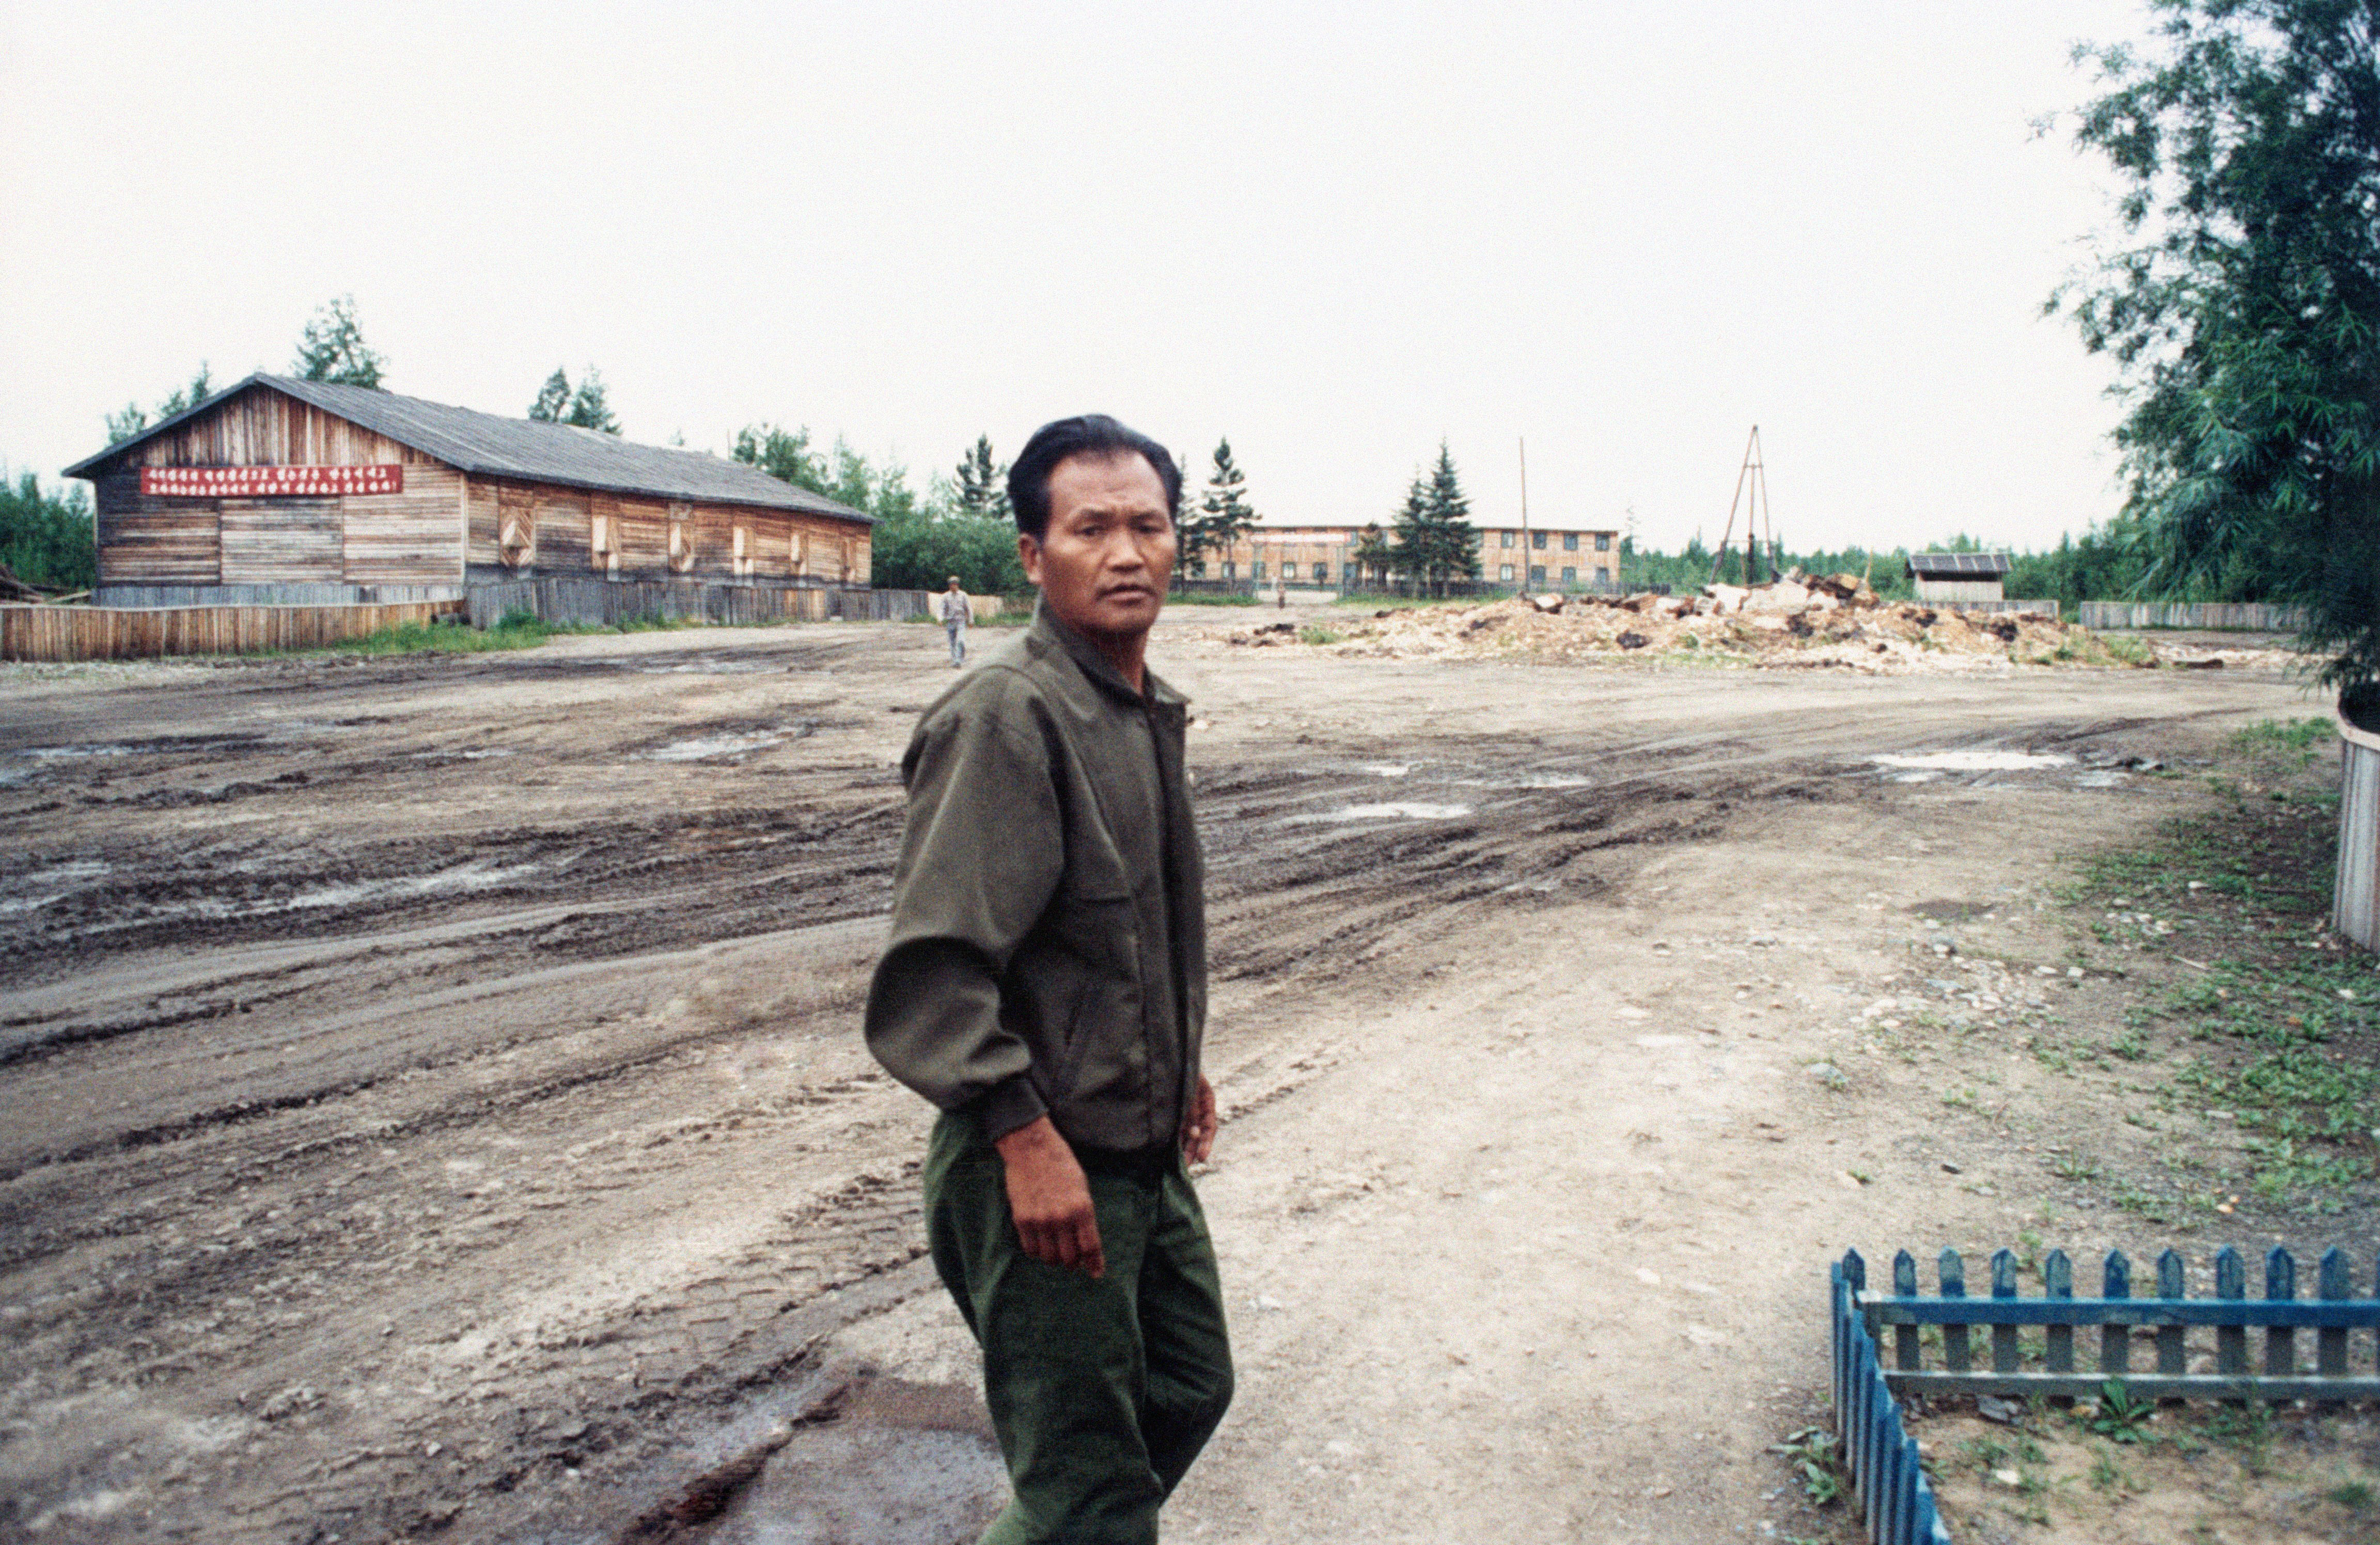 A man stands in front of barracks and bare dirt at North Korea’s gulag in Siberia, Khabarovsk Territory, Chegdomynsky District, Zimovye, 2001.